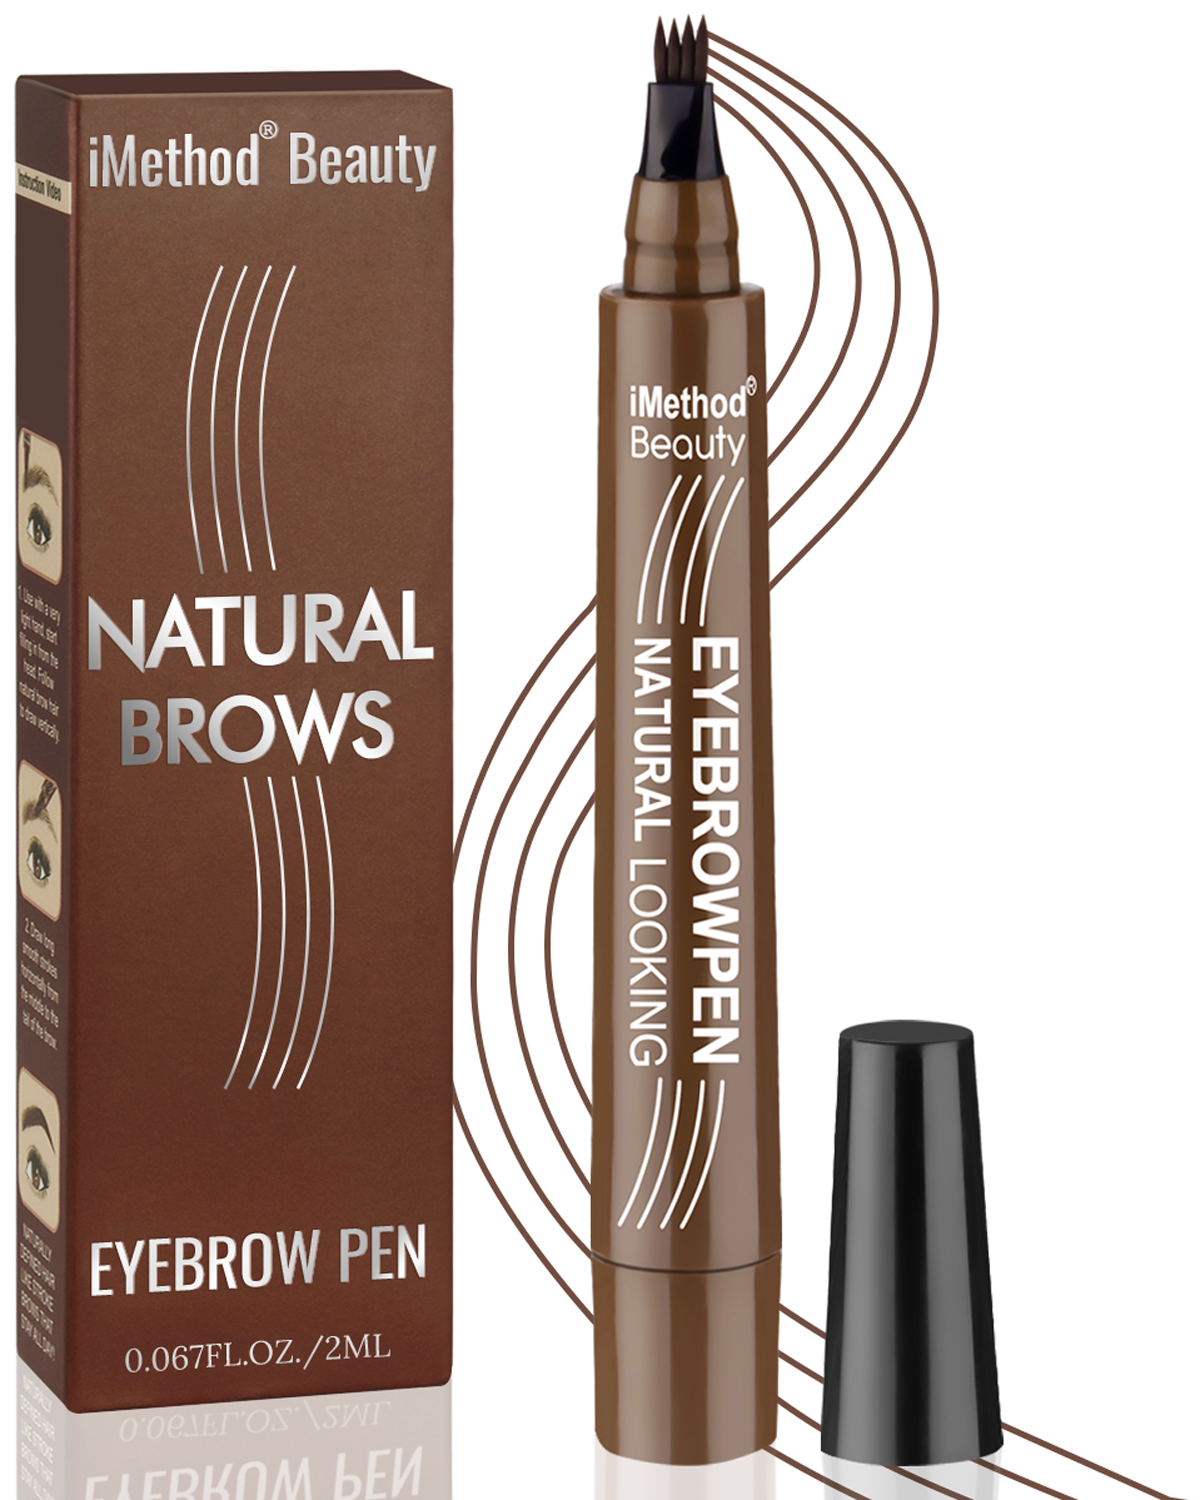 Roller Needles Tattoo Eyebrow Supply Manual Pen Microblading 3D Permanent Eye  Brow Professional Microblade Tool From Hayoumart8, SG $4.01 | DHgate.Com